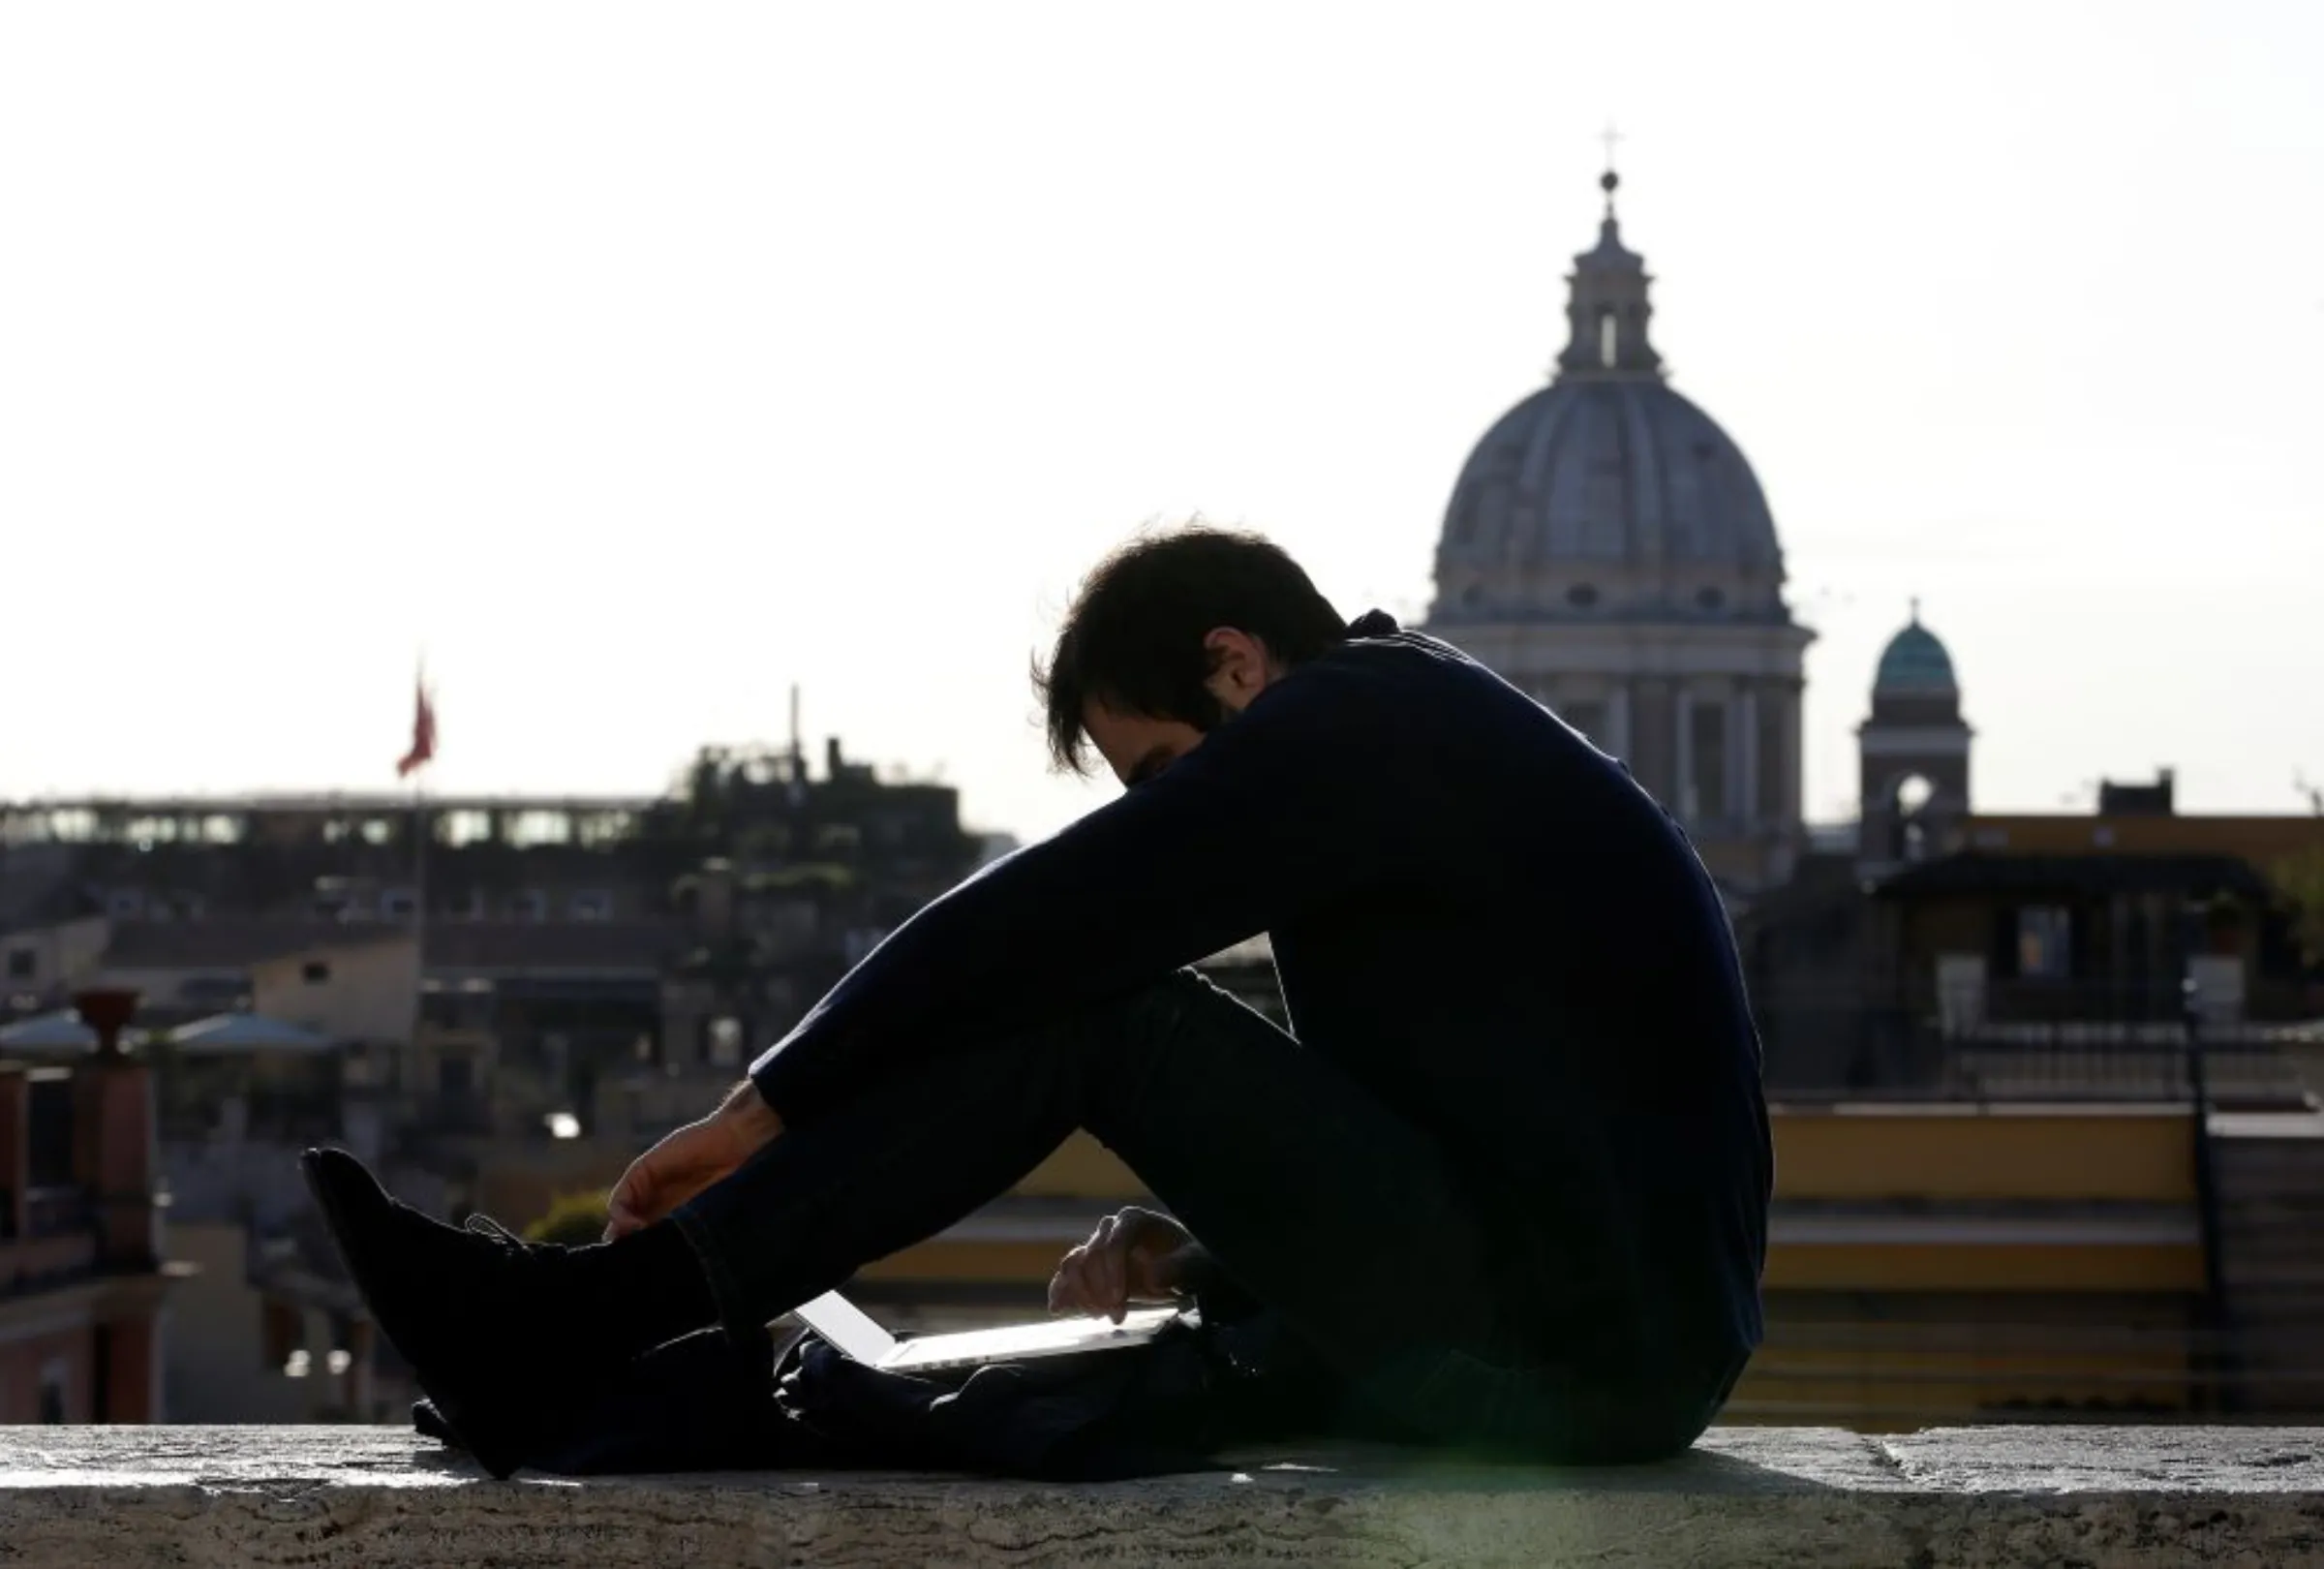 A man uses a laptop in Rome, Italy March 1, 2016